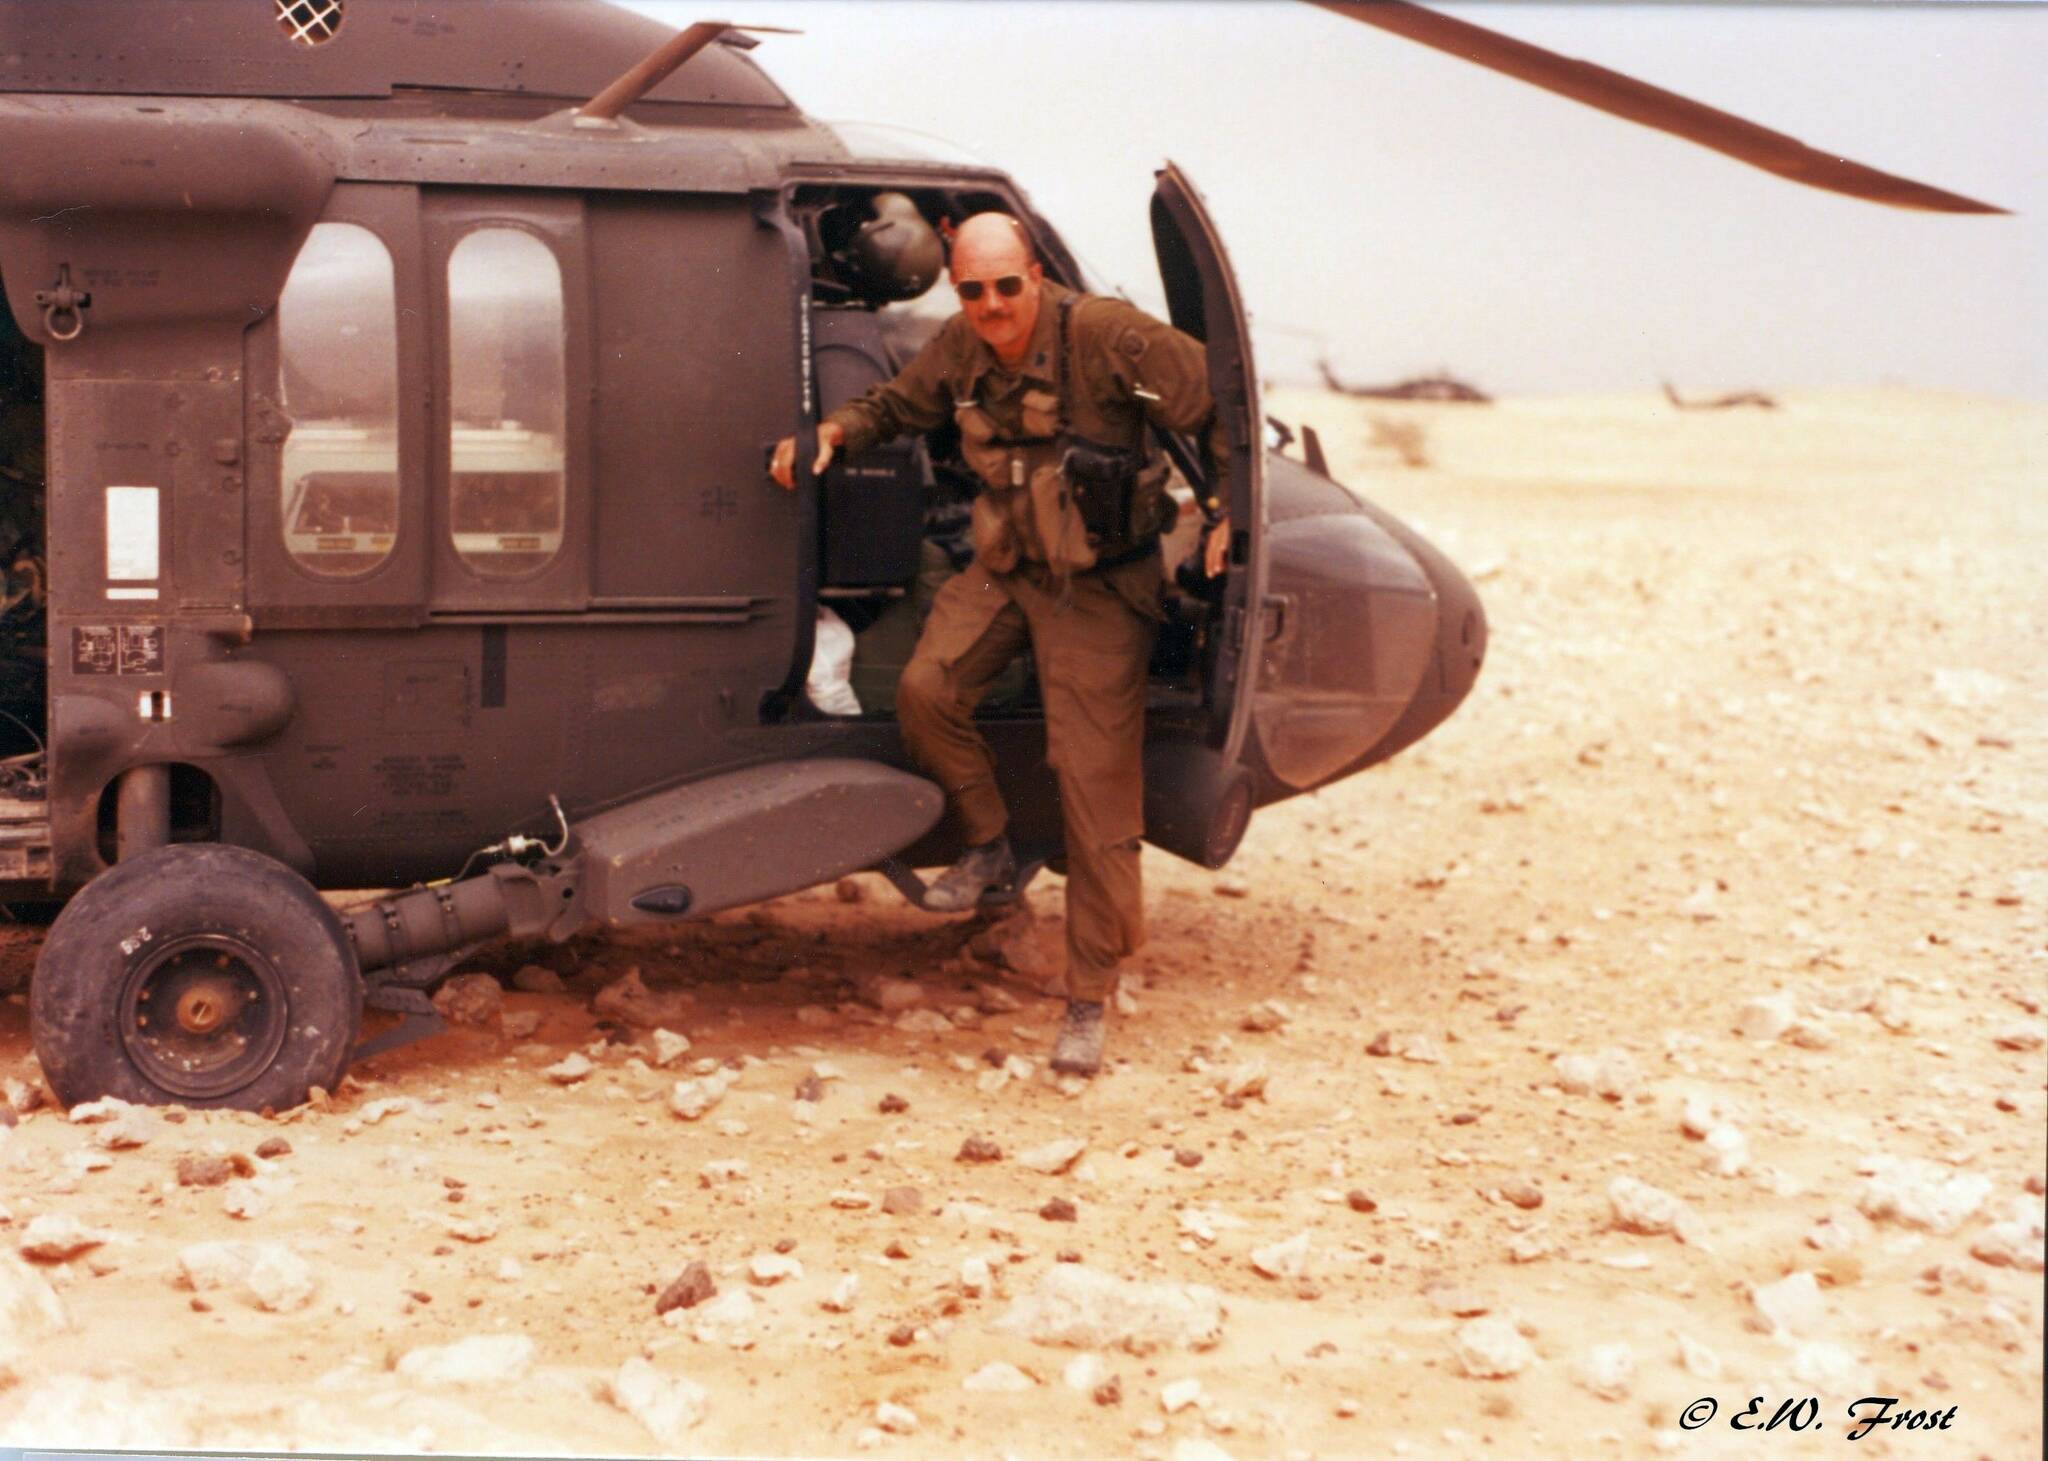 Bill Frost sets foot in Iraq during Desert Storm on Feburary 28, 1991. (Photo provided)